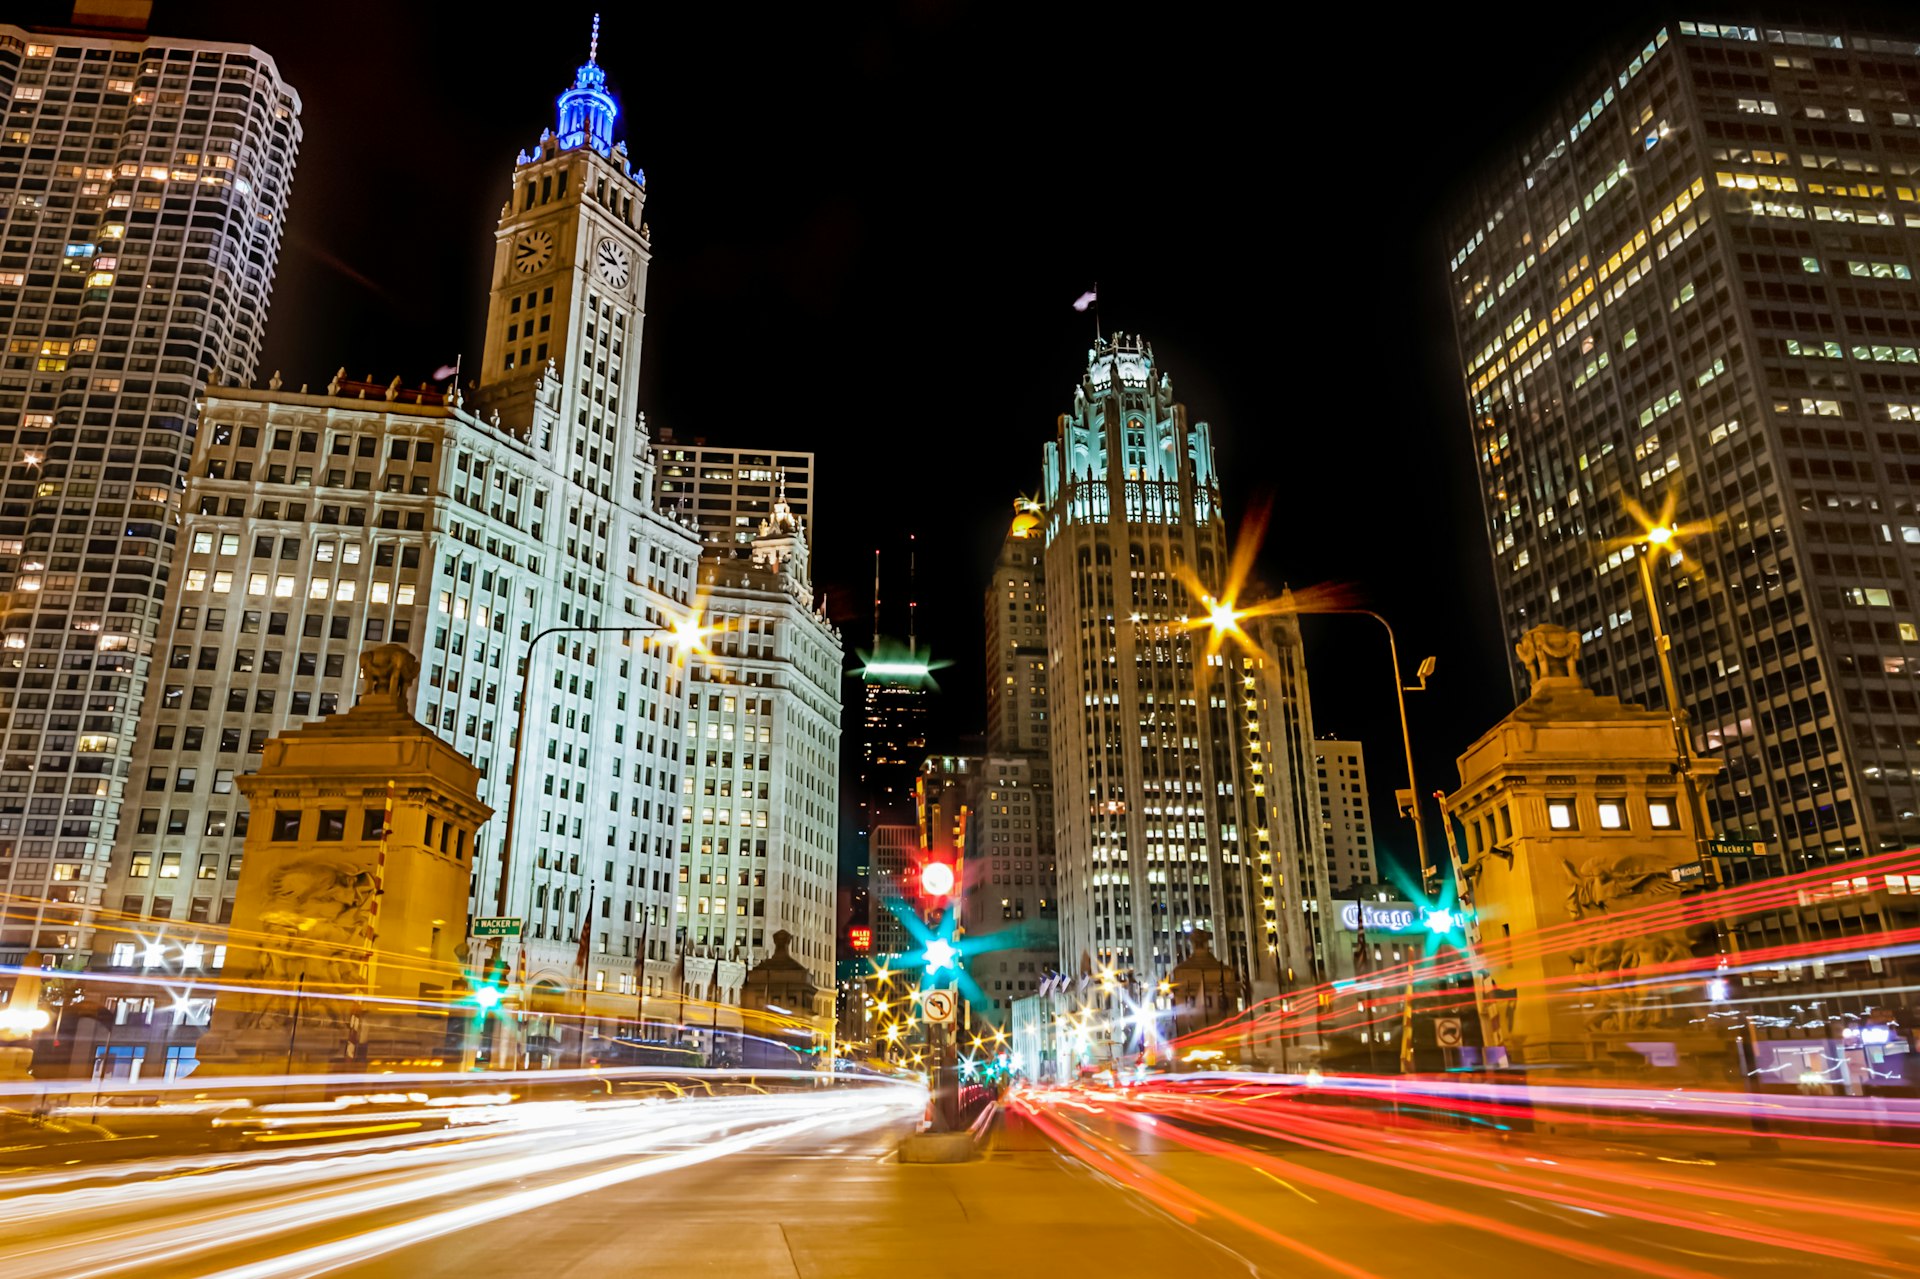 In a long-exposure photograph, cars zoom through downtown Chicago leaving trails of light at night; Perfect weekend in Chicago